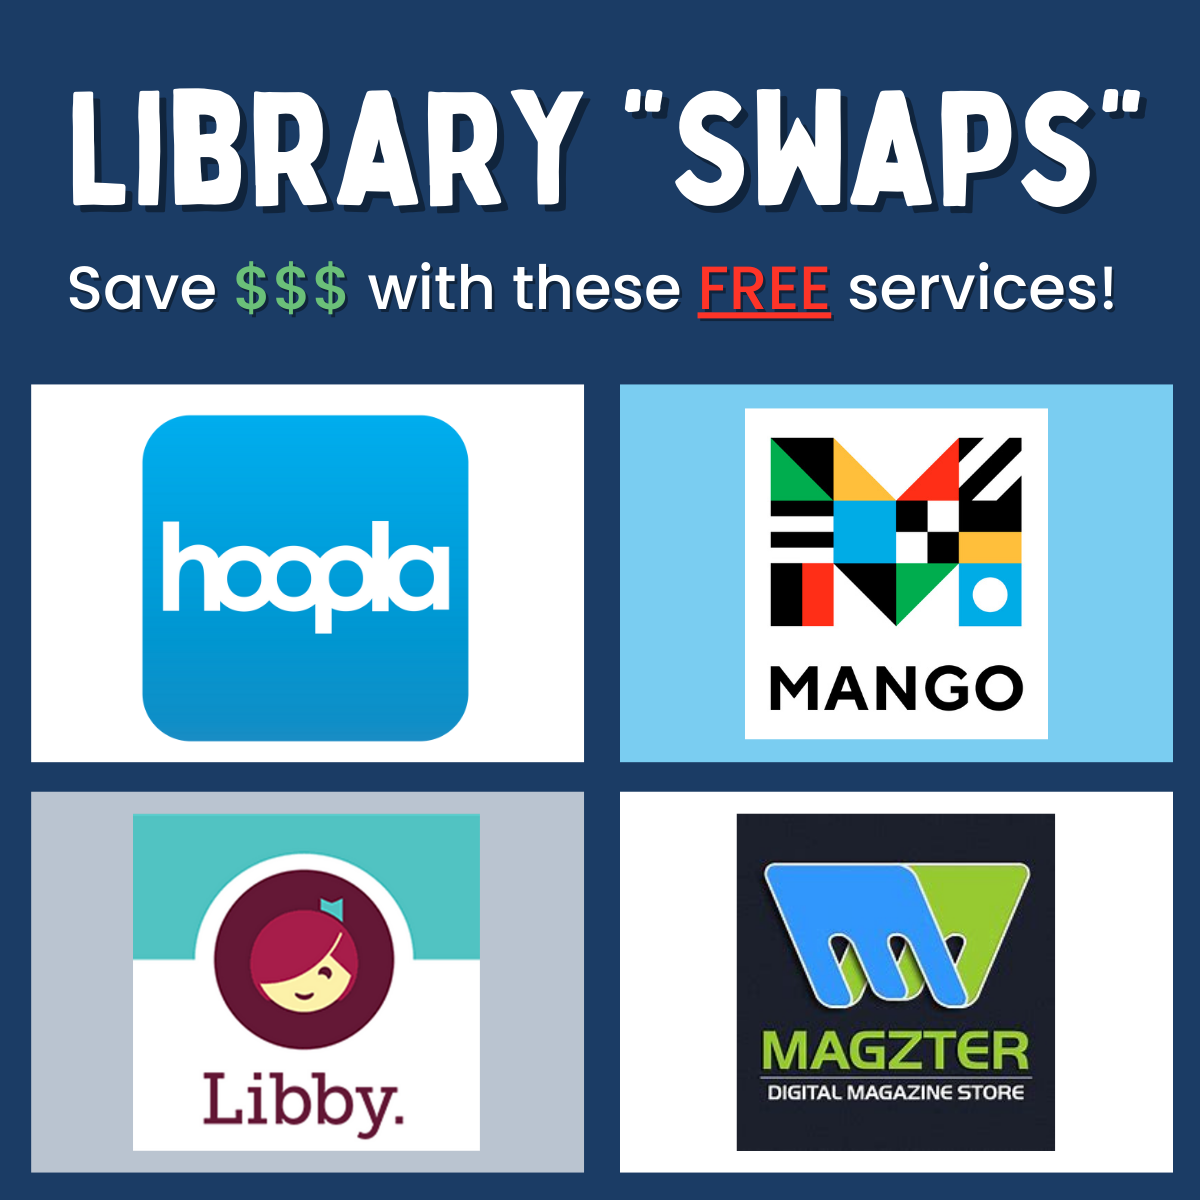 Library Swaps; Save money with these free services; logos for hoopla, Mango, Libby, and Magzter